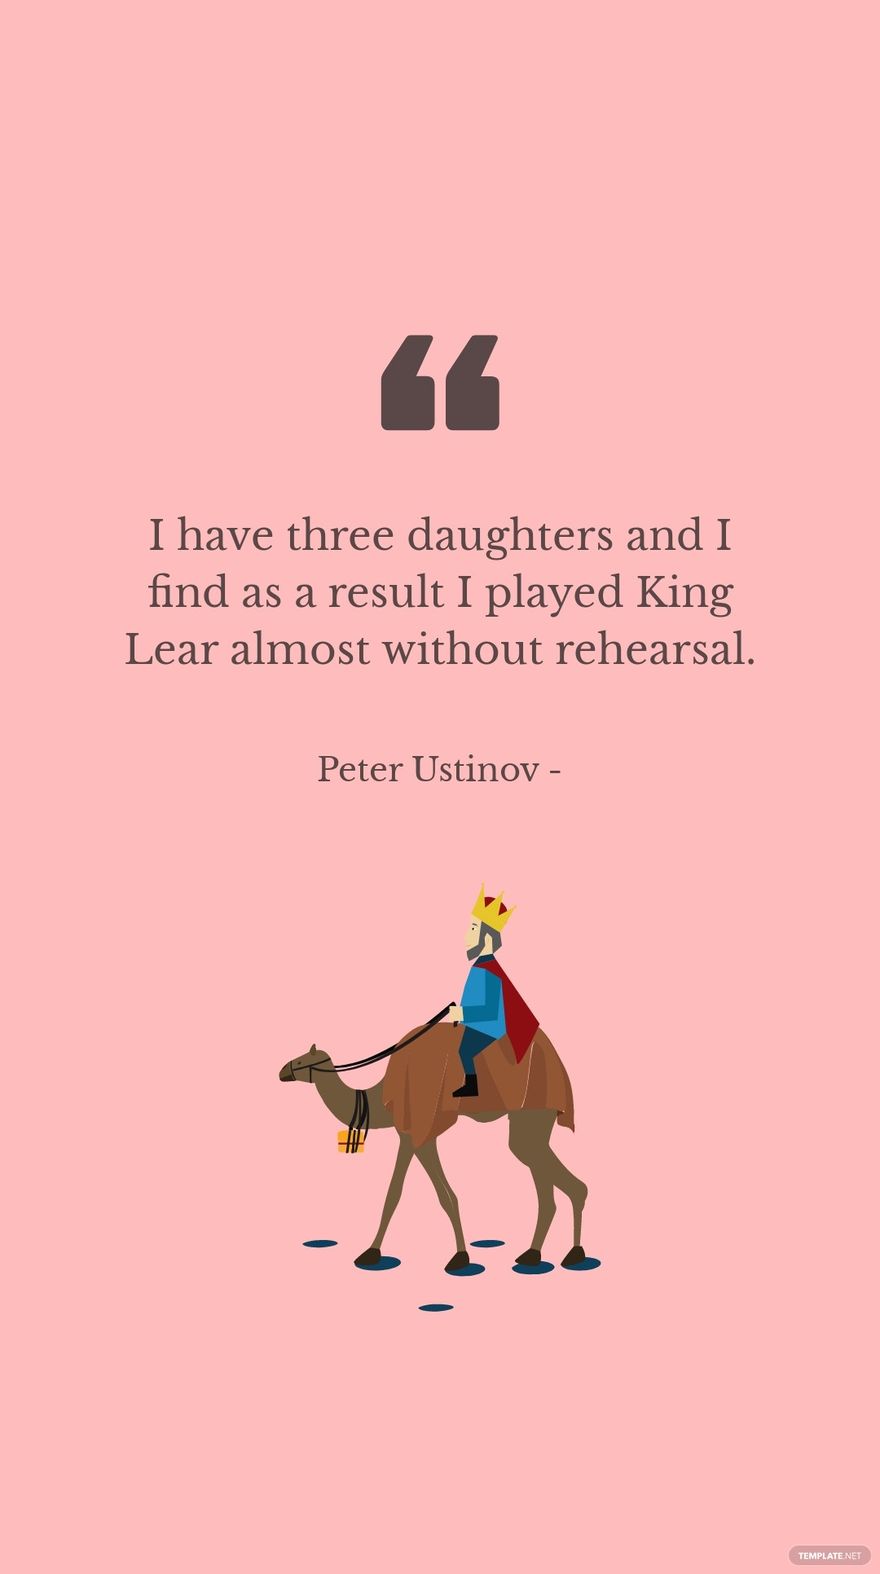 Peter Ustinov - I have three daughters and I find as a result I played King Lear almost without rehearsal.